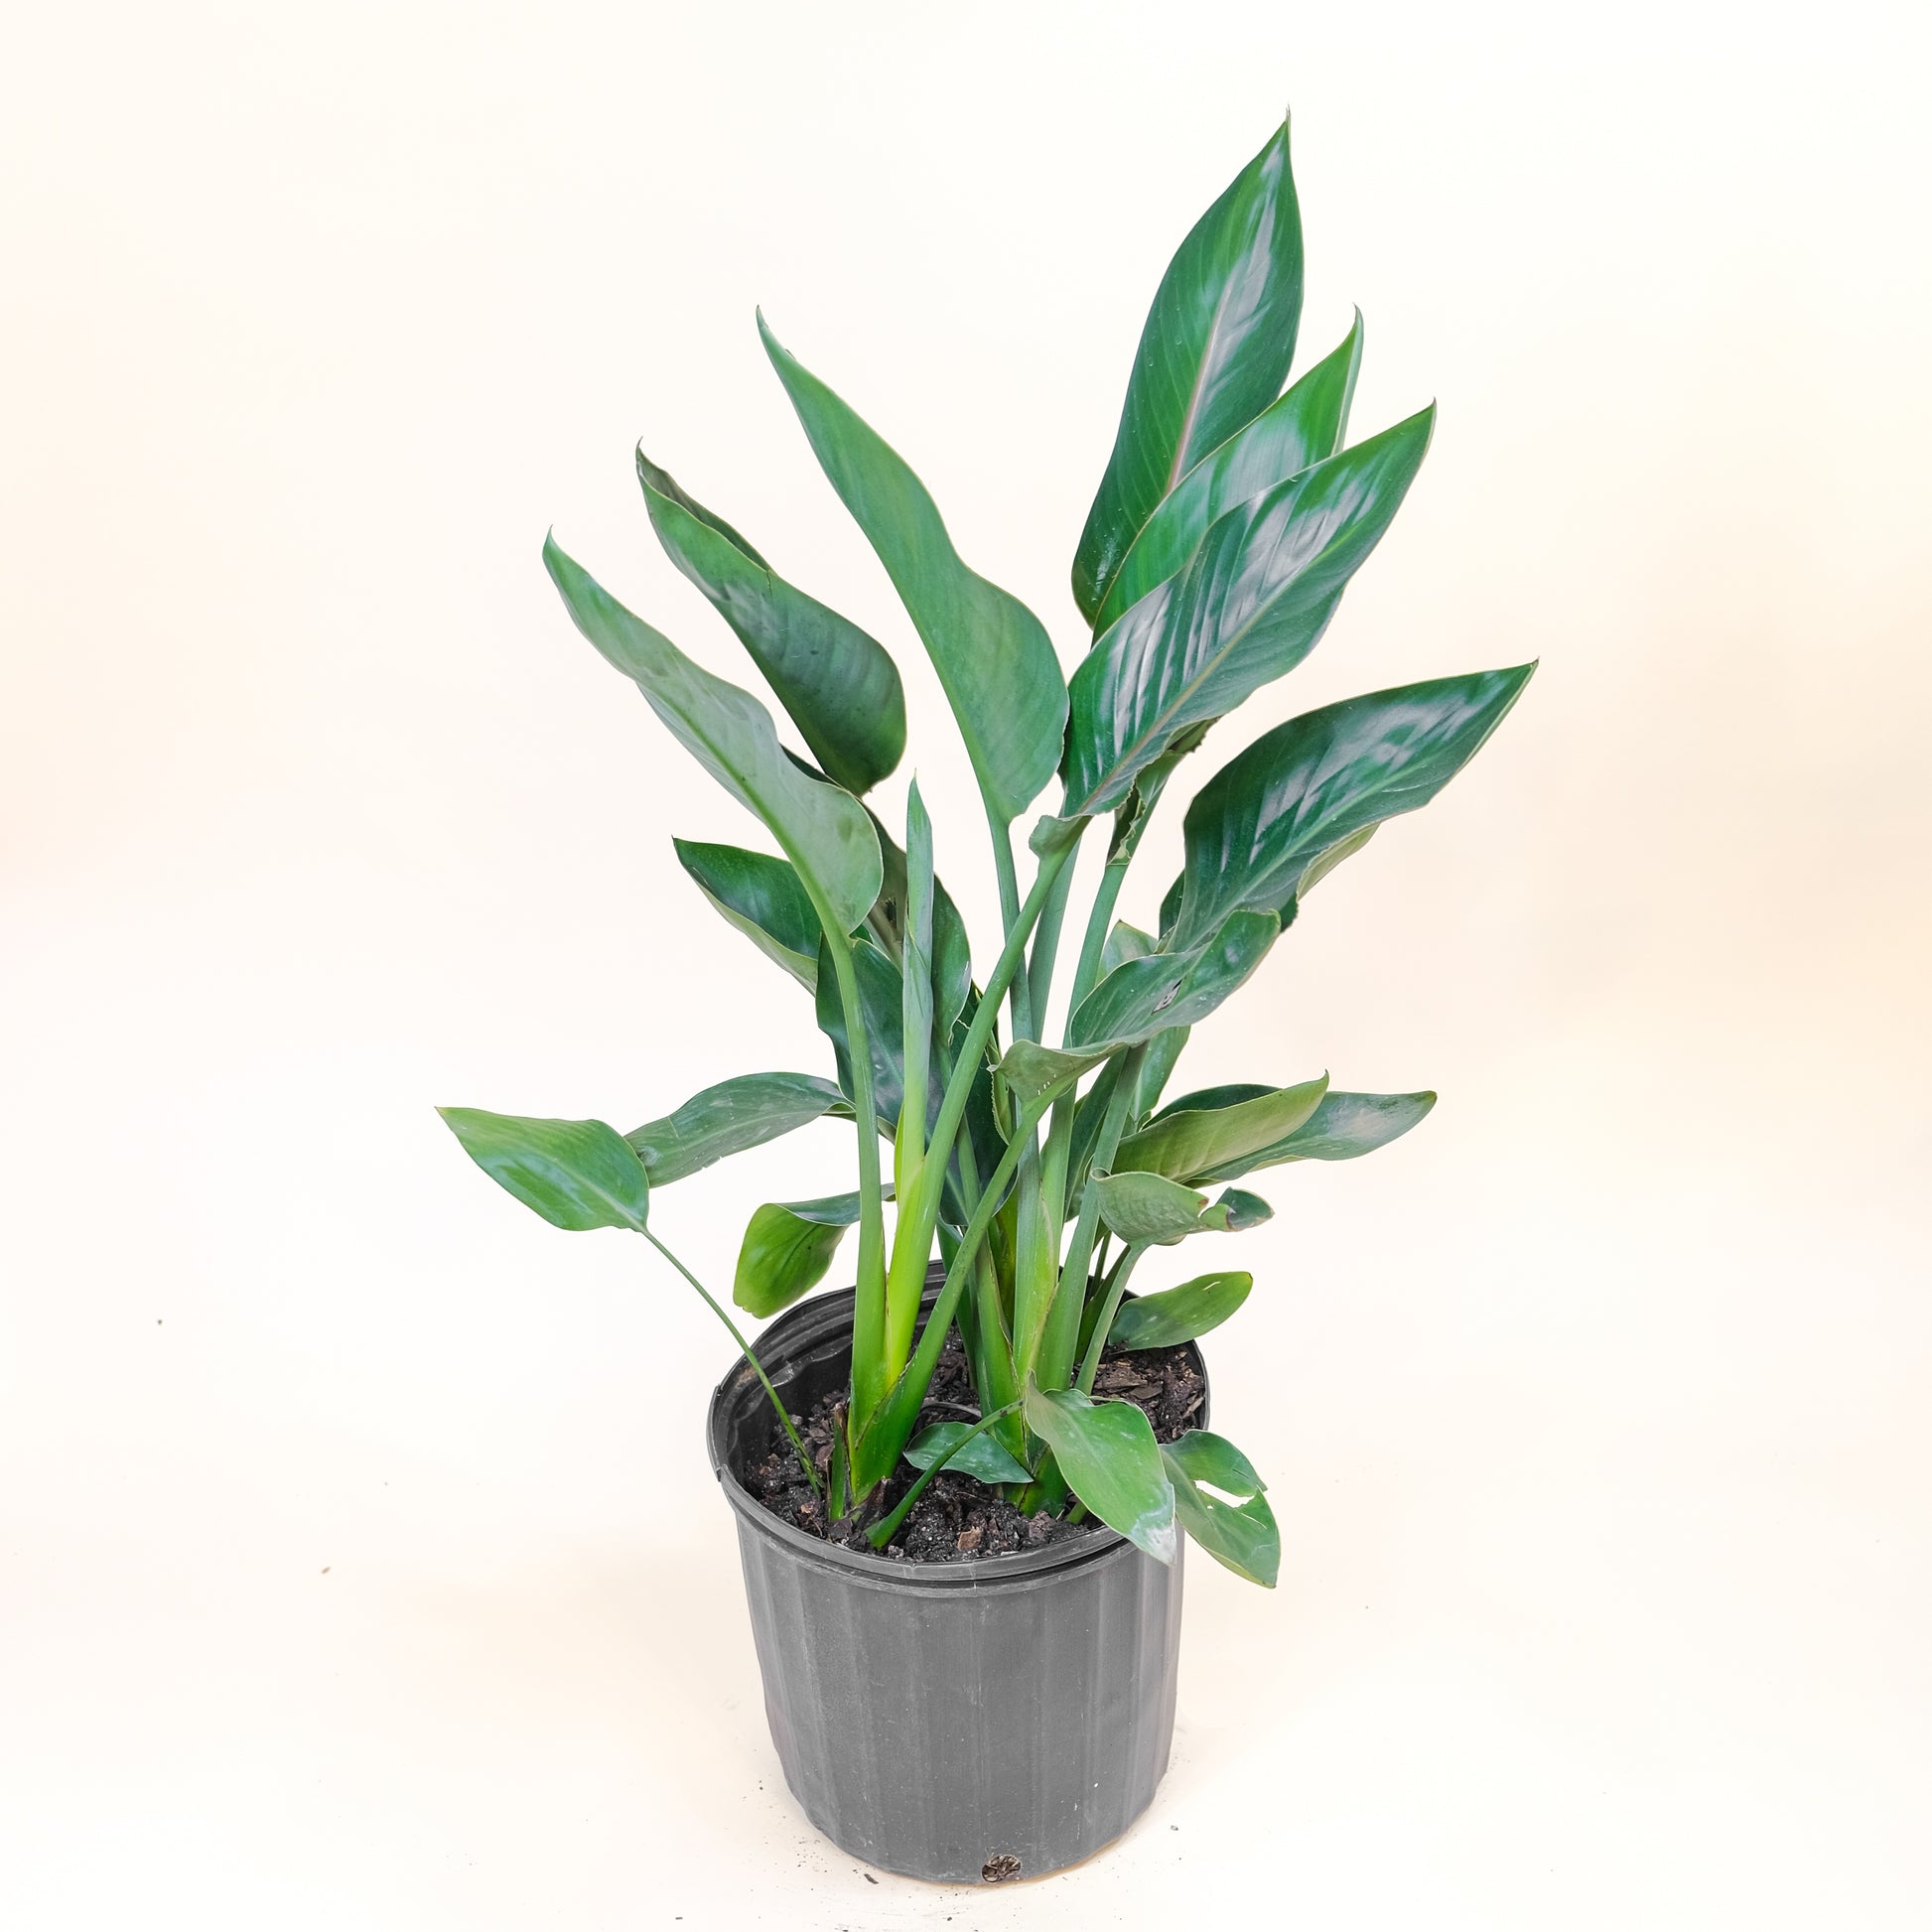 Orange Bird of Paradise (Strelitzia reginae) in a 10 inch pot. Indoor plant for sale by Promise Supply for delivery and pickup in Toronto